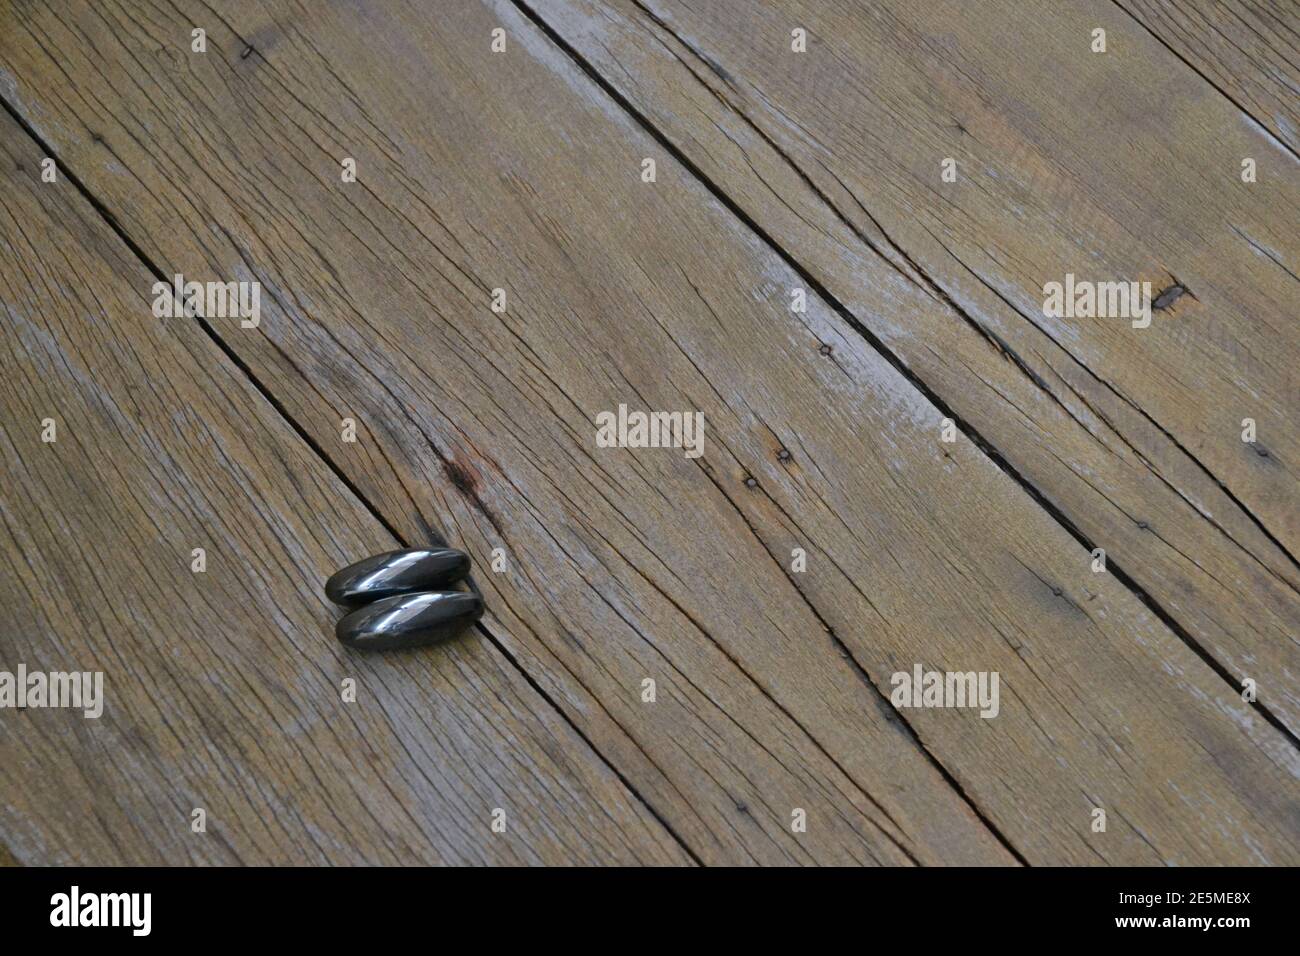 Magnet or magnet. Two units of a ima or magnet in a bright dark color, on an old wooden background, with copy space. Stock Photo